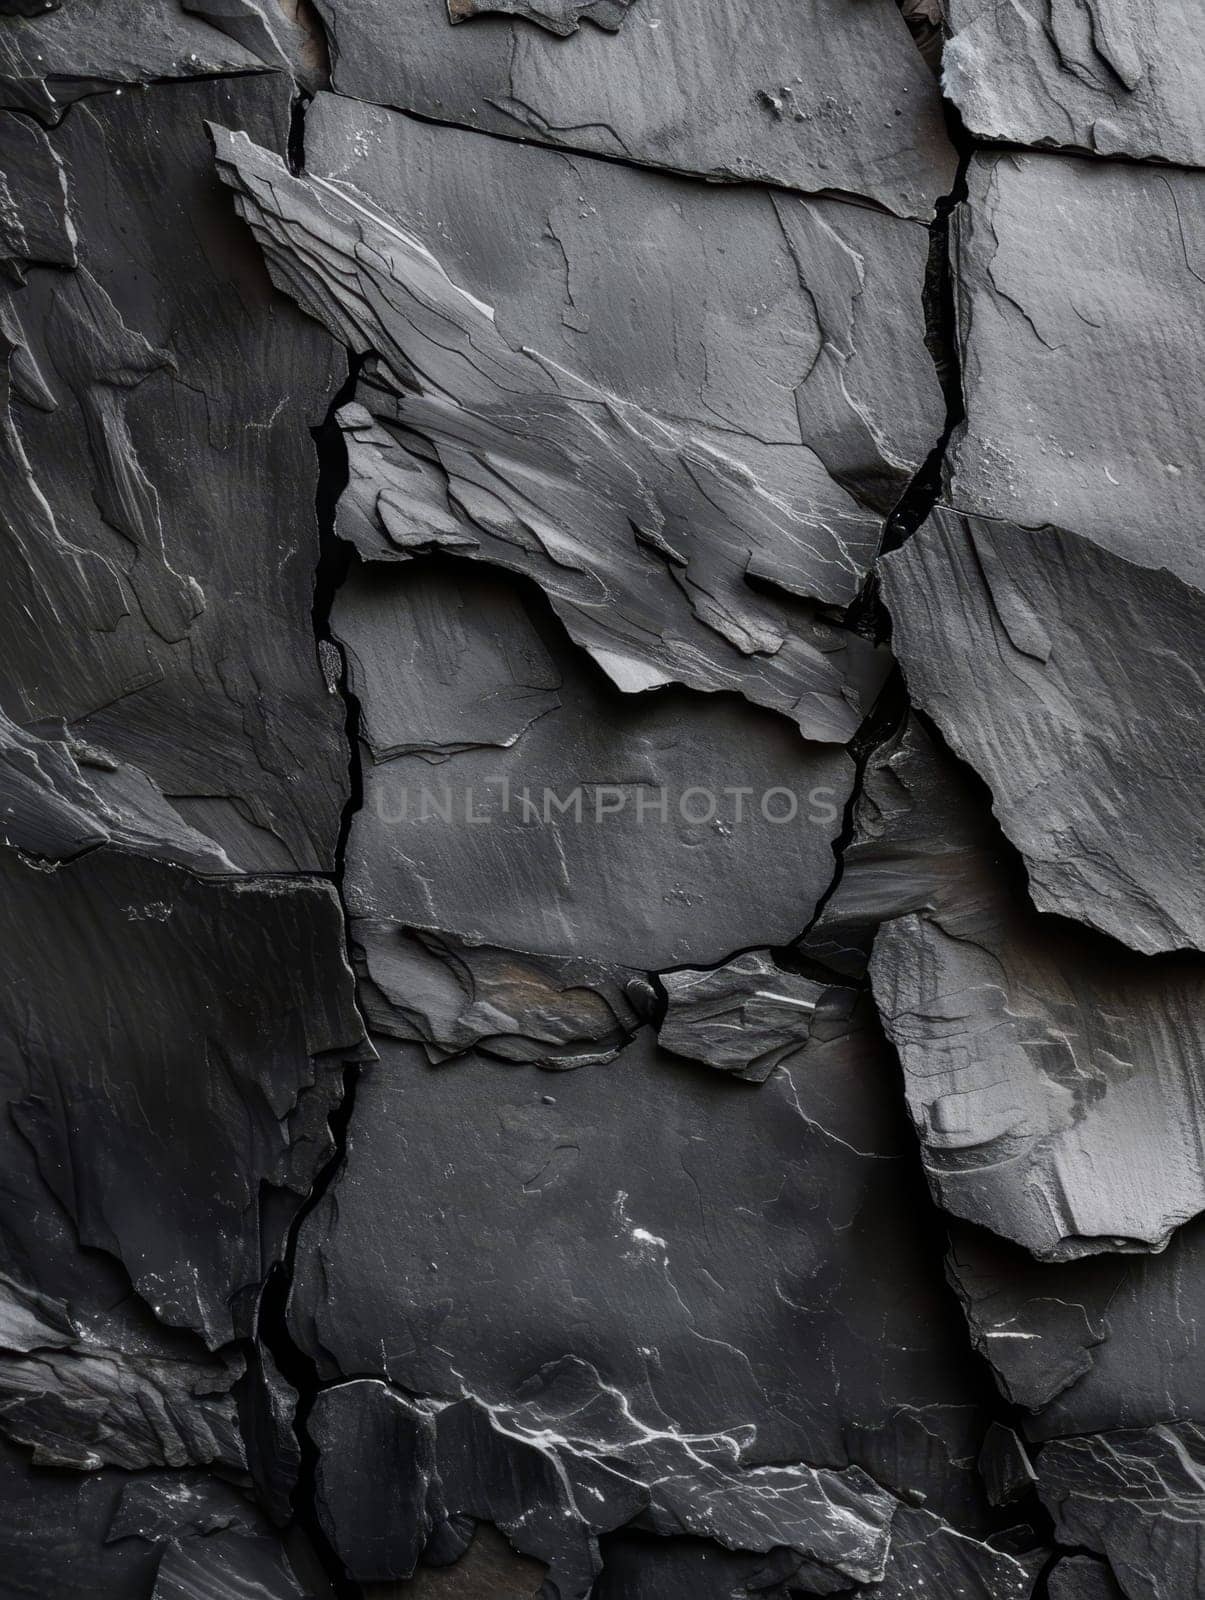 Close-up view of a dark, textured rock surface with jagged and rough texture. by sfinks